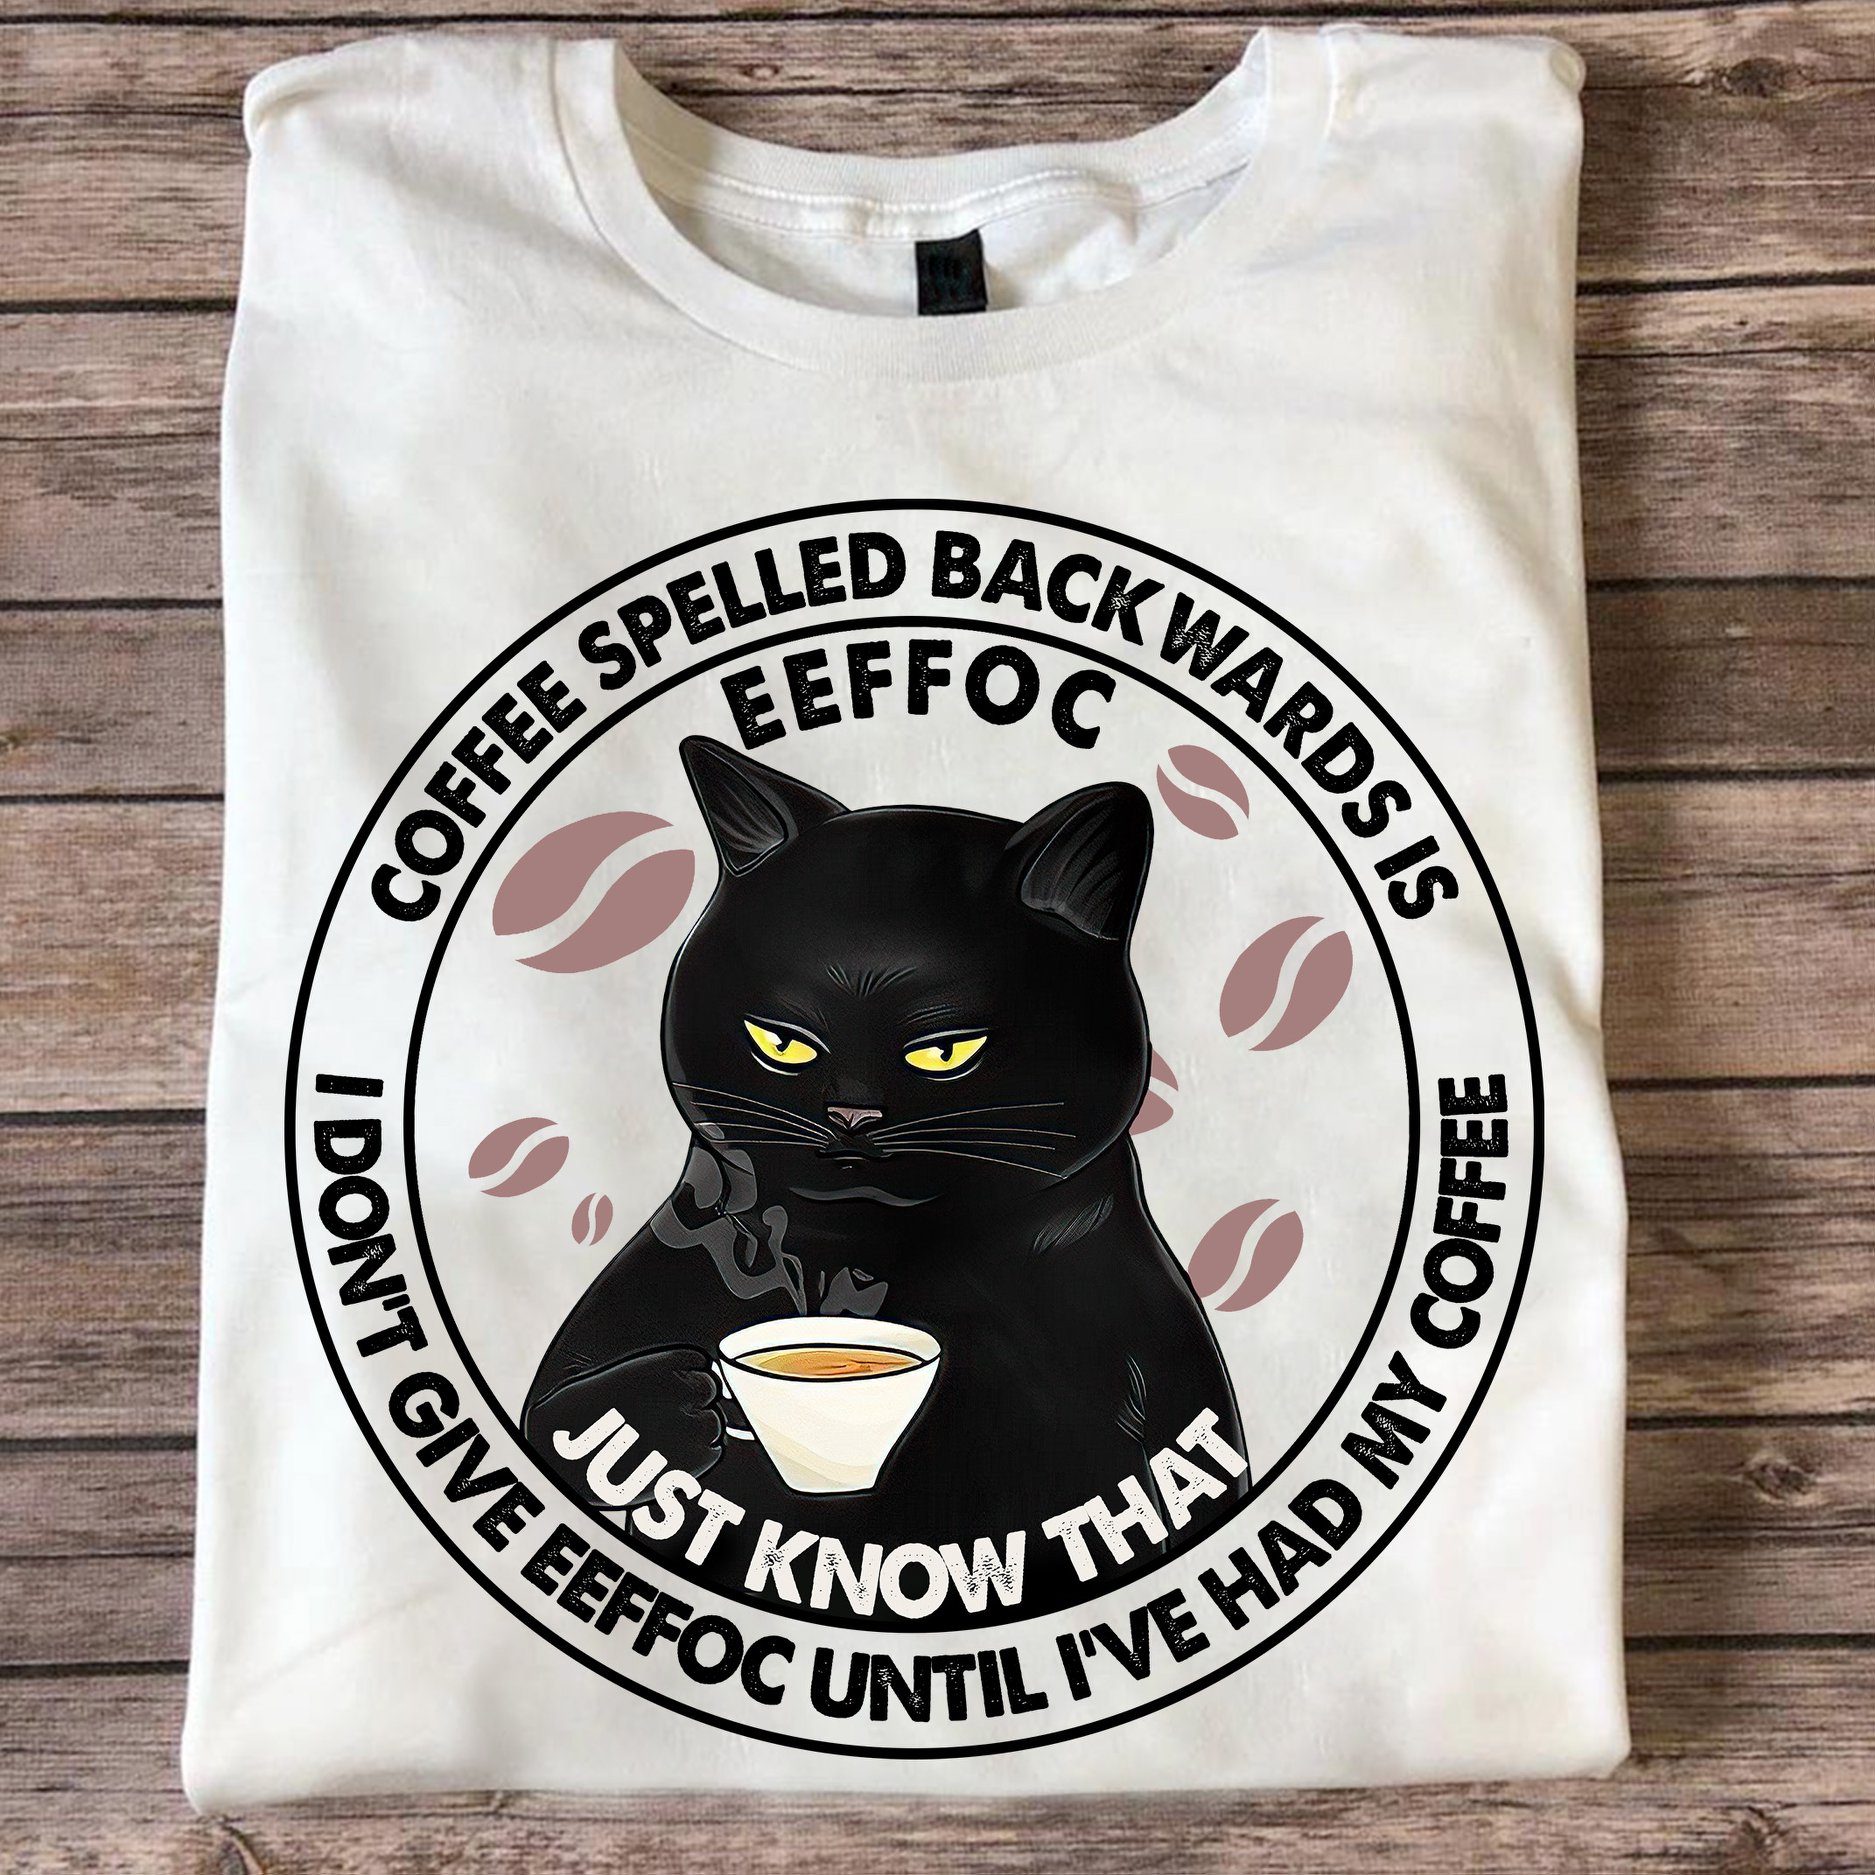 Coffee spelled backwards is I don't give coffee until I've had my coffee - Black cat